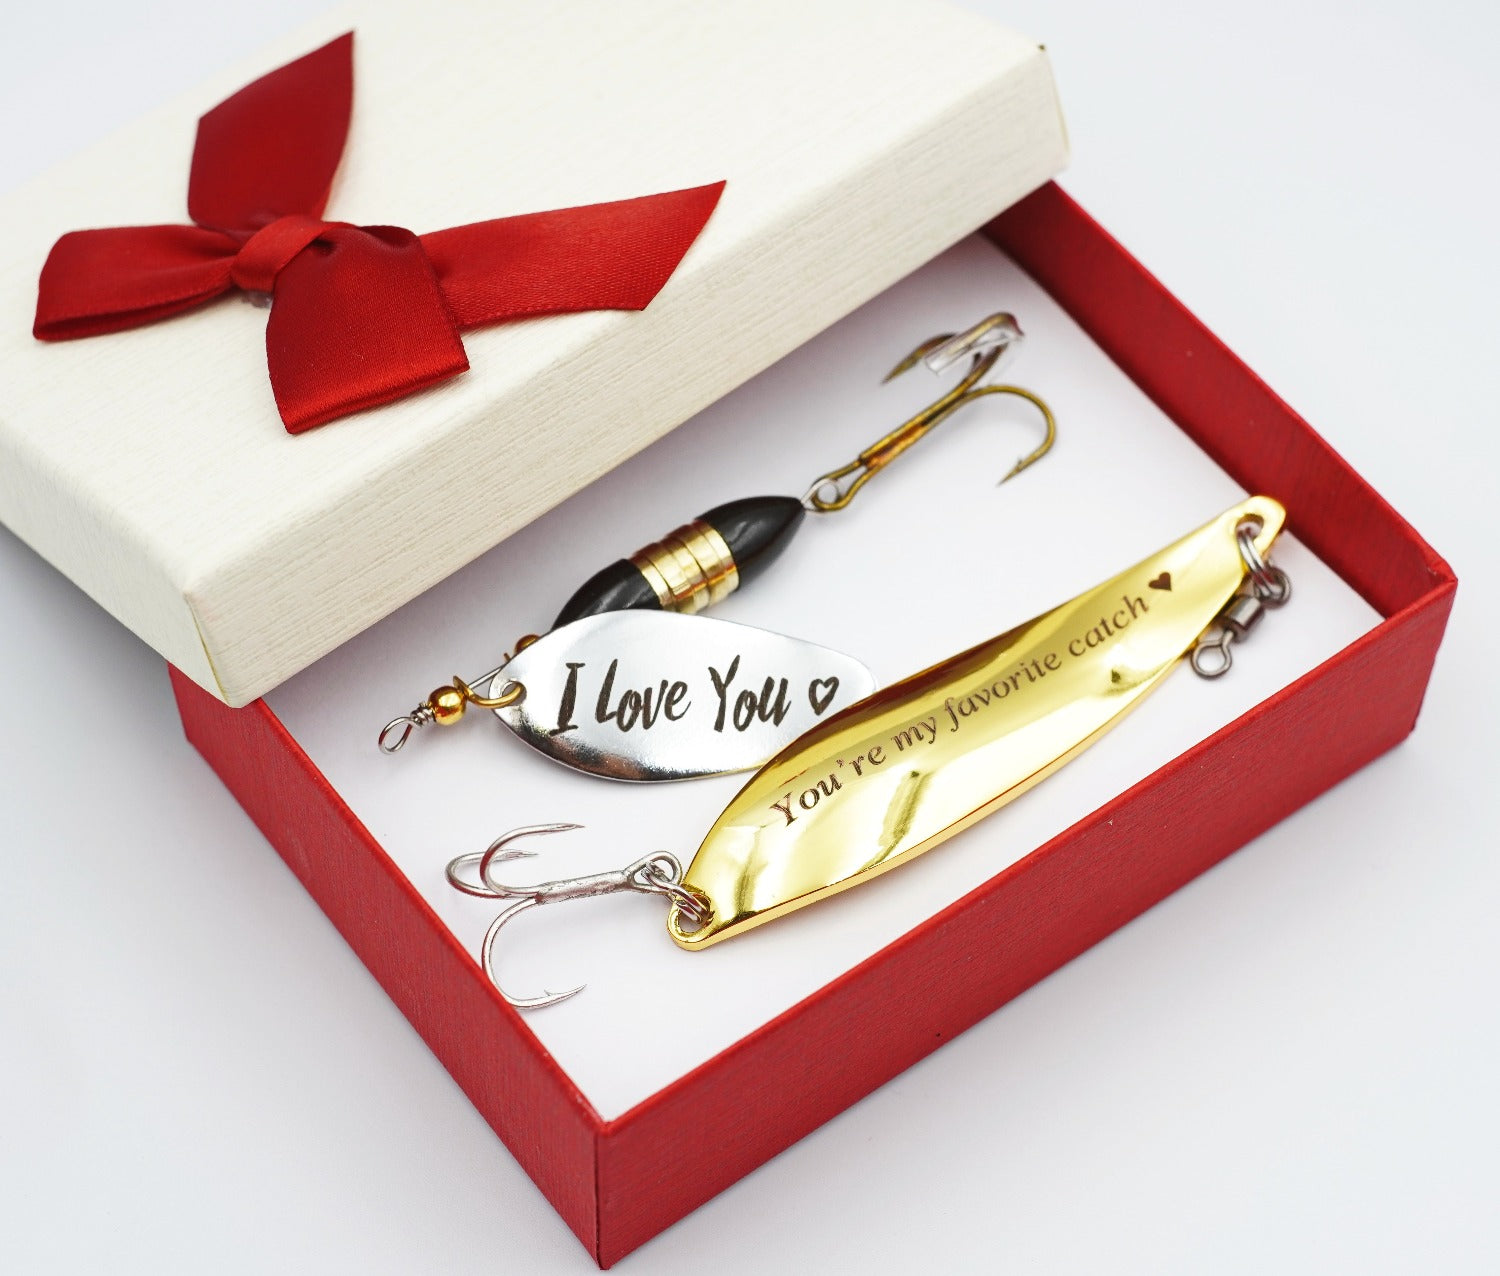 Fishing Lure, Fathers Day Gift, For Him, Boyfriend Gift, Personalized